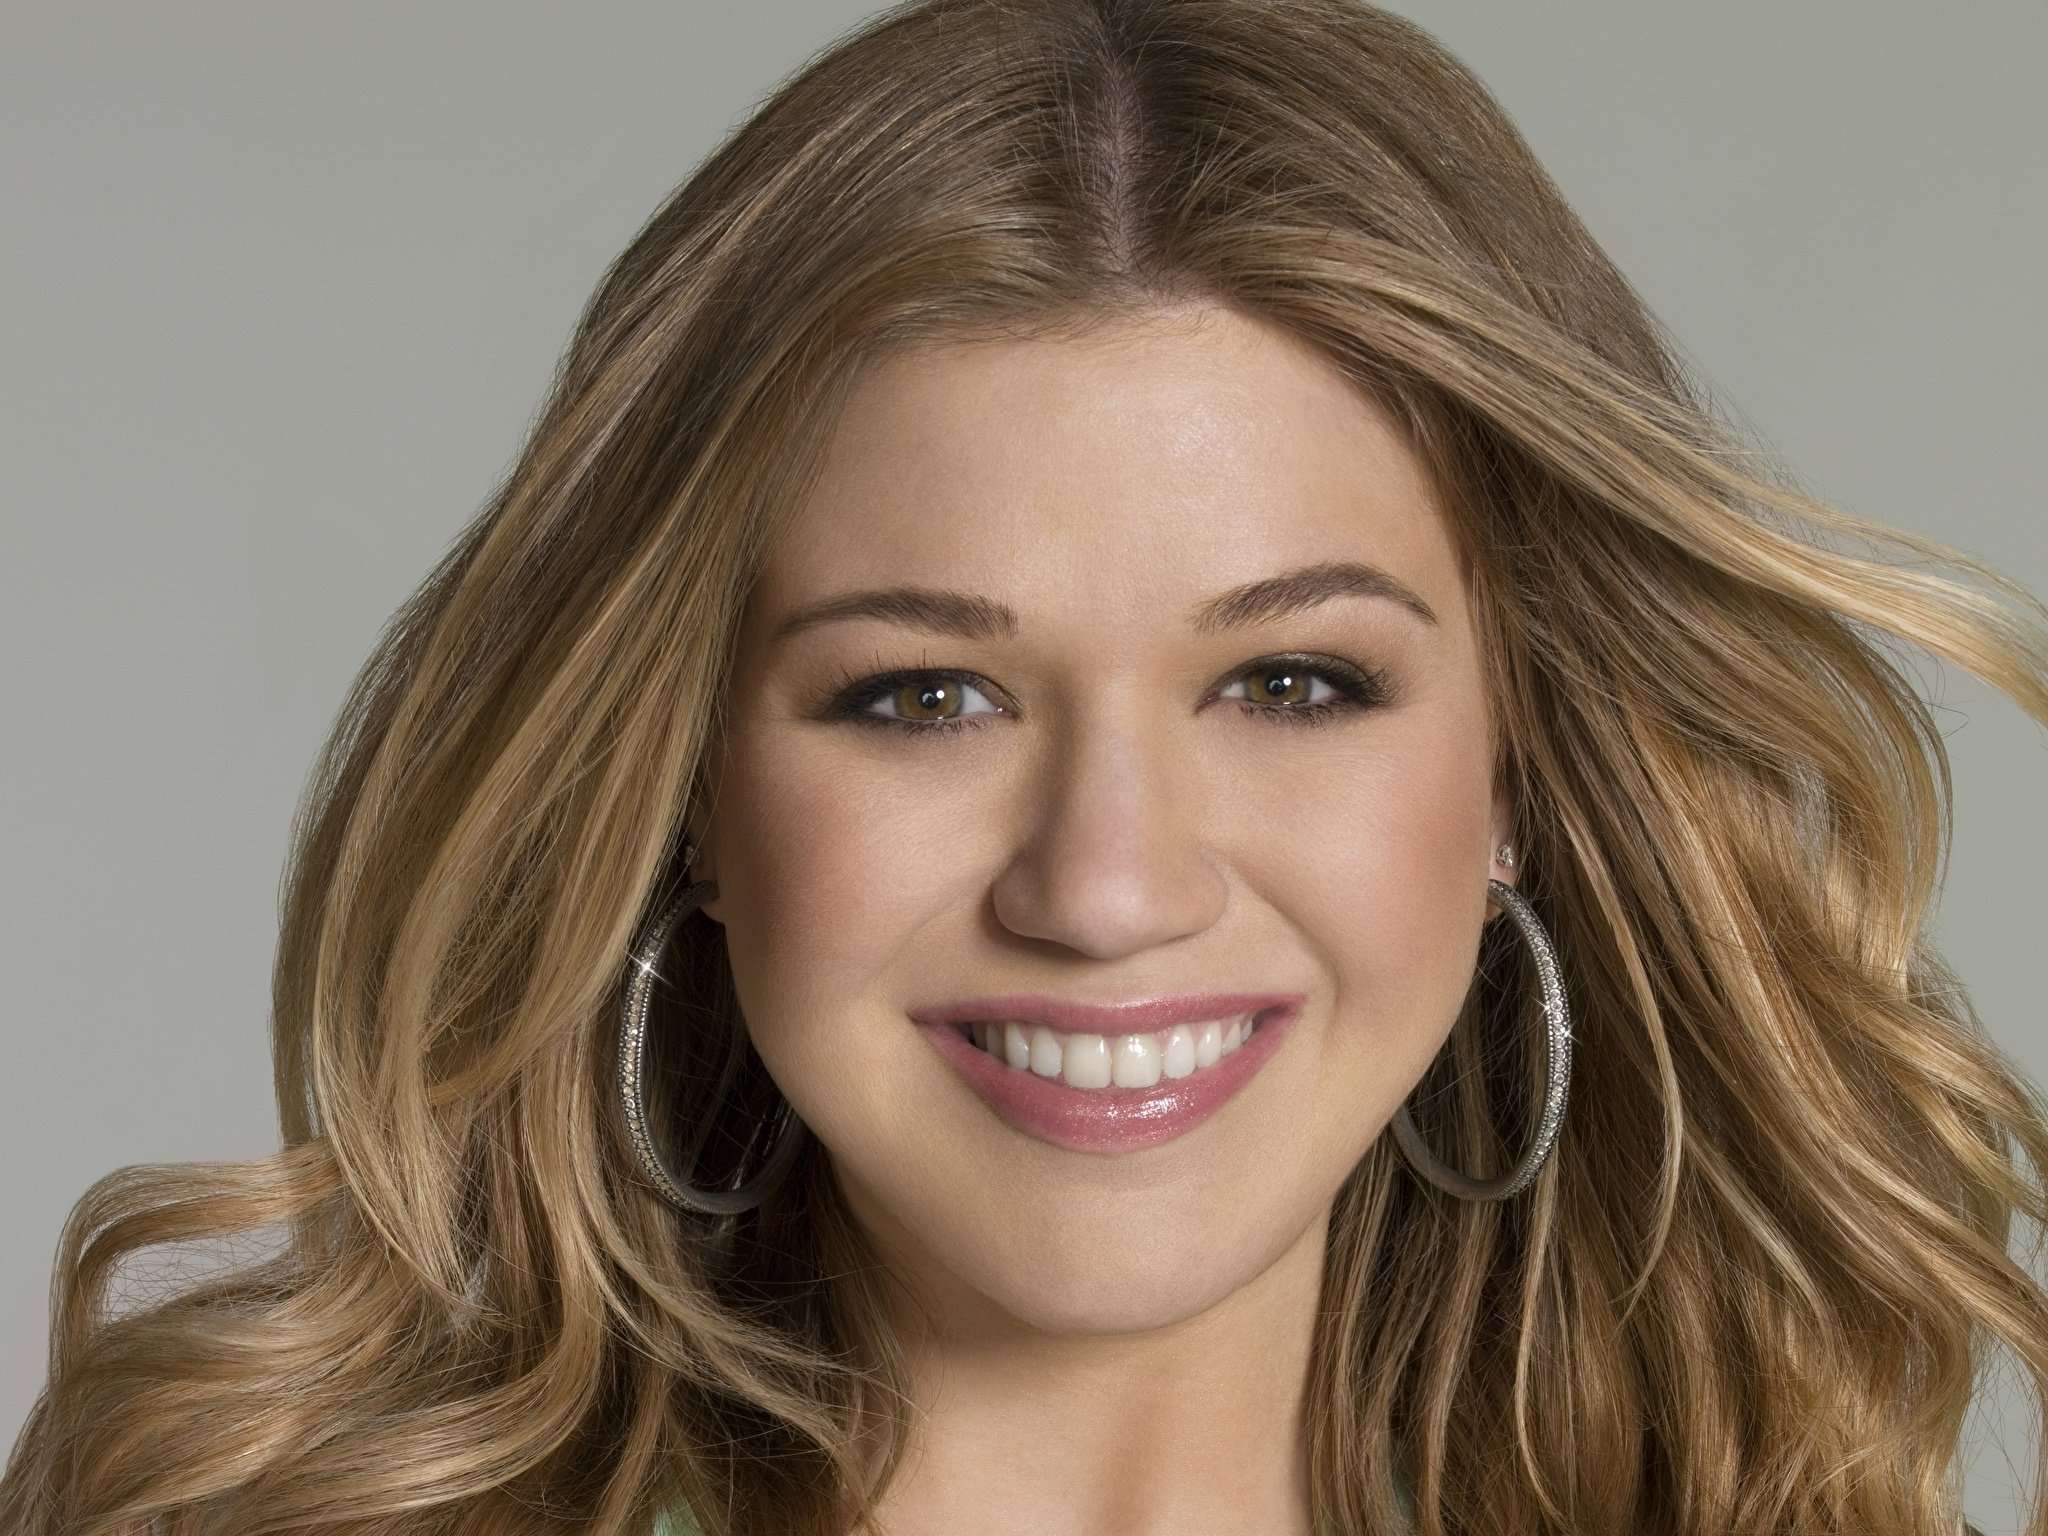 Picture Kelly Clarkson Eyes Smile Face Hair Girls Music 2048x1536.